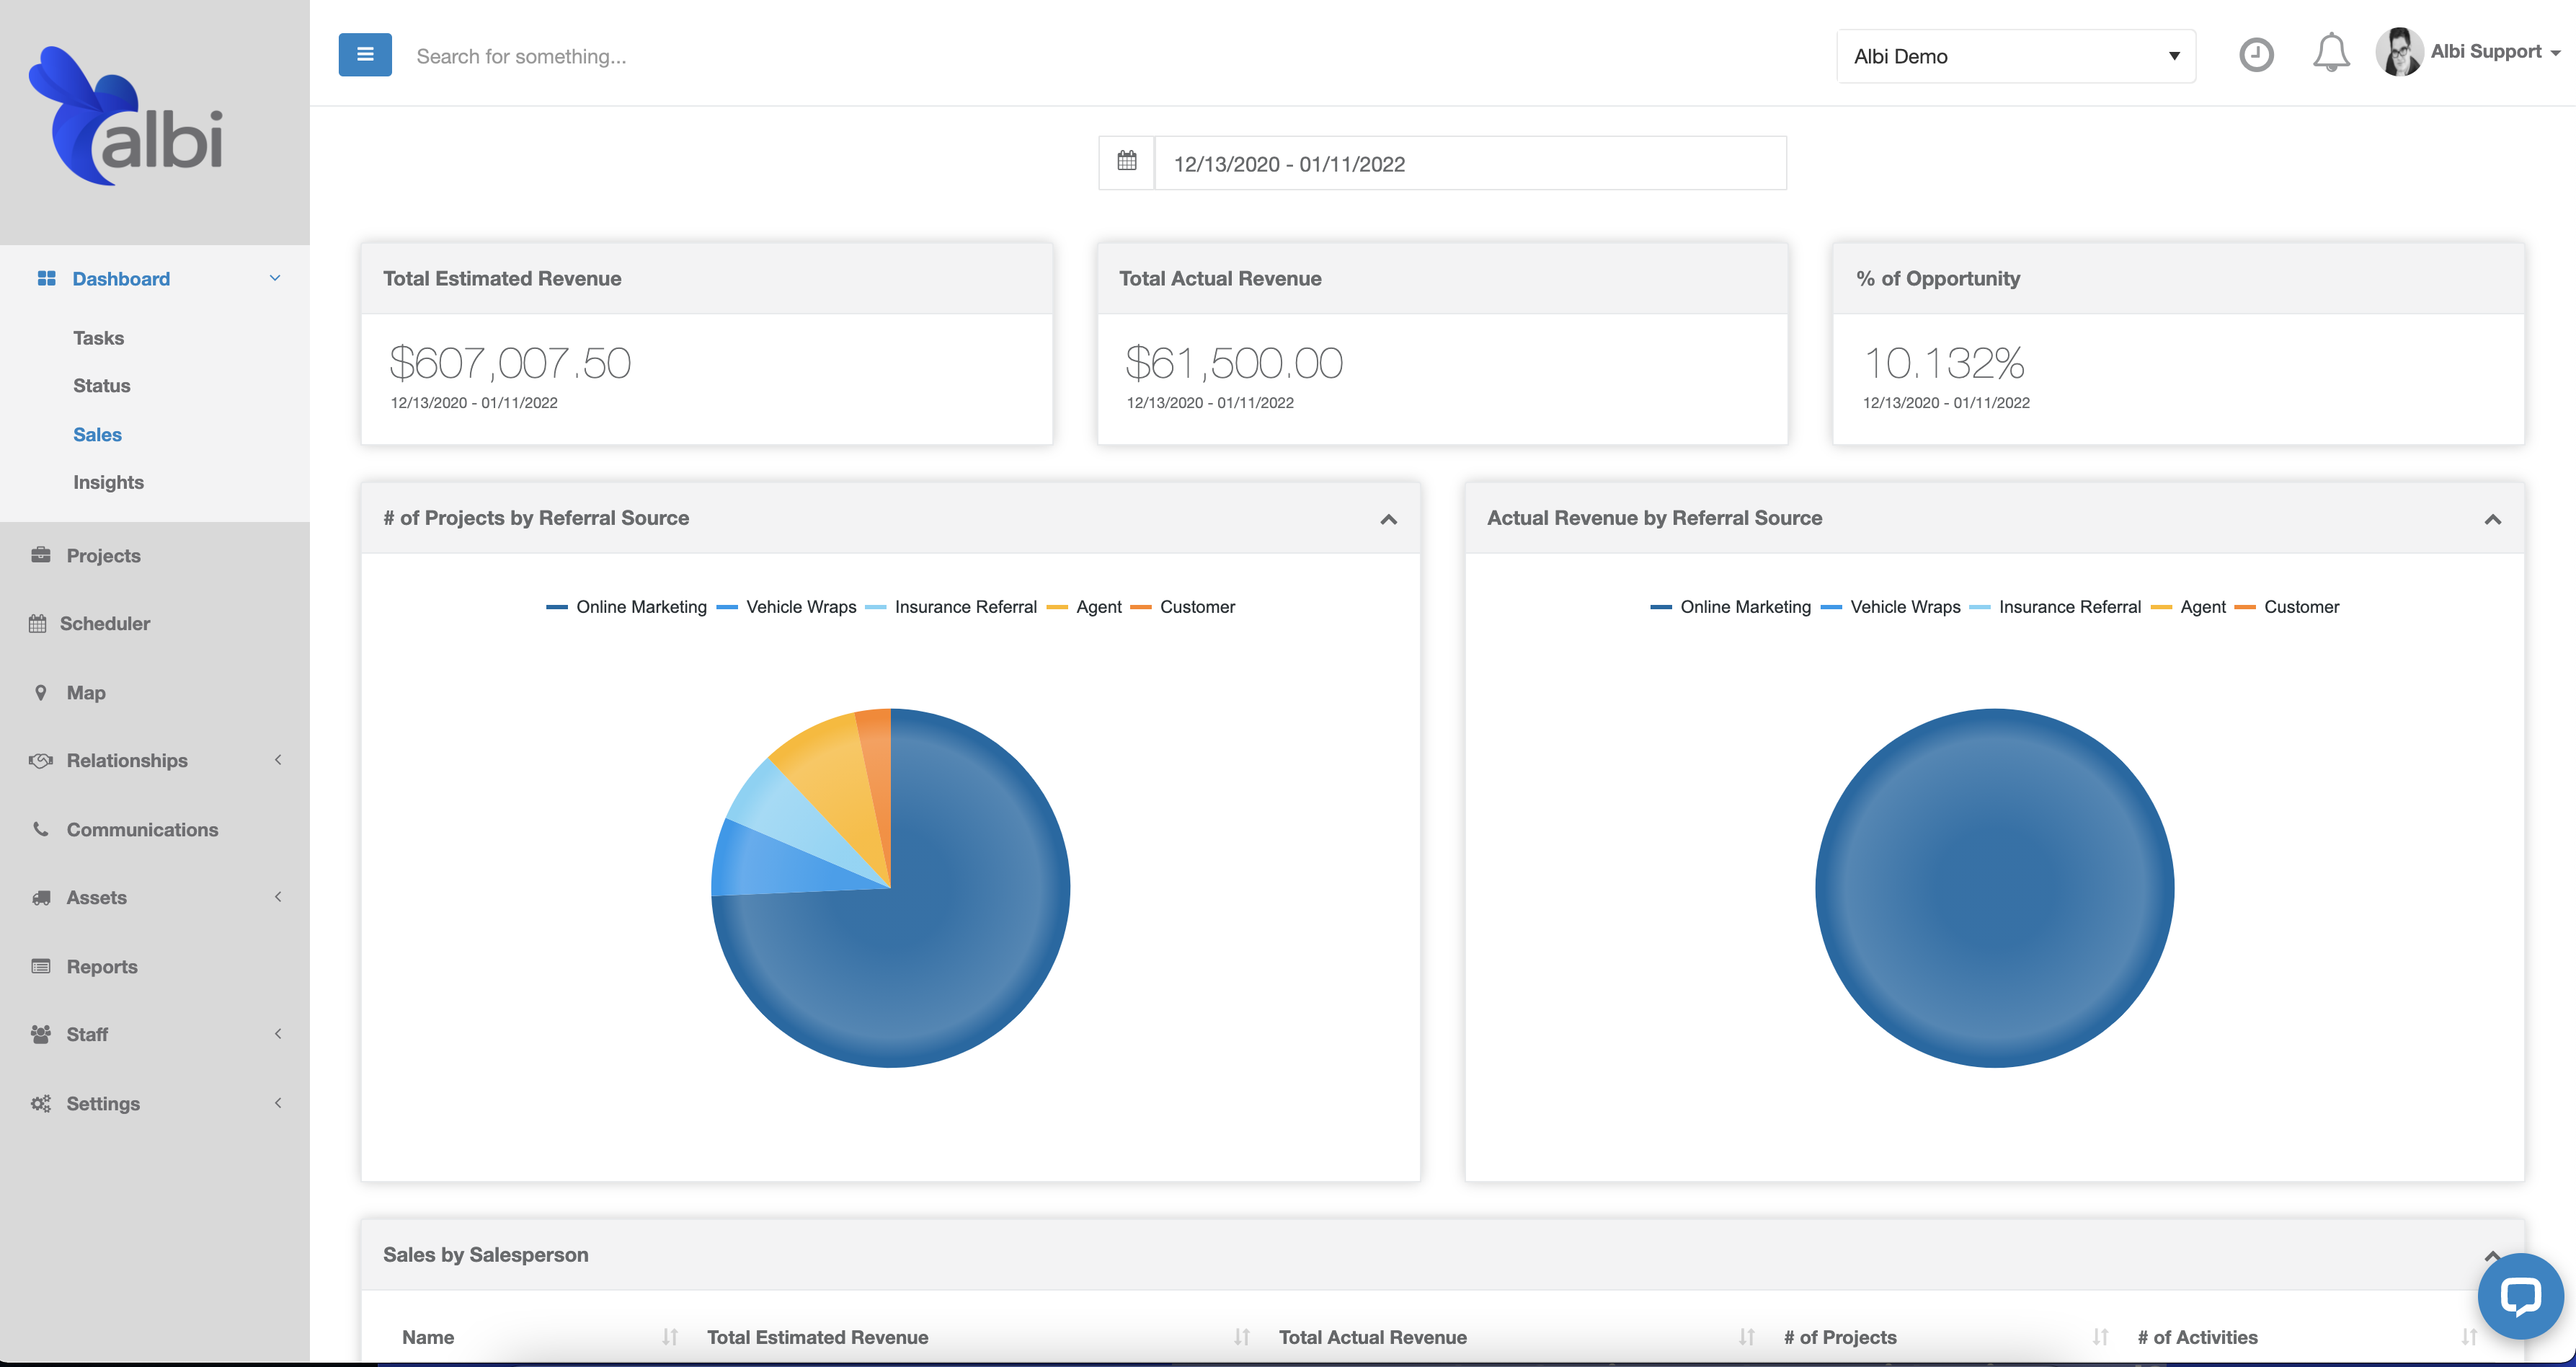 Custom reports empower users to make better business decisions